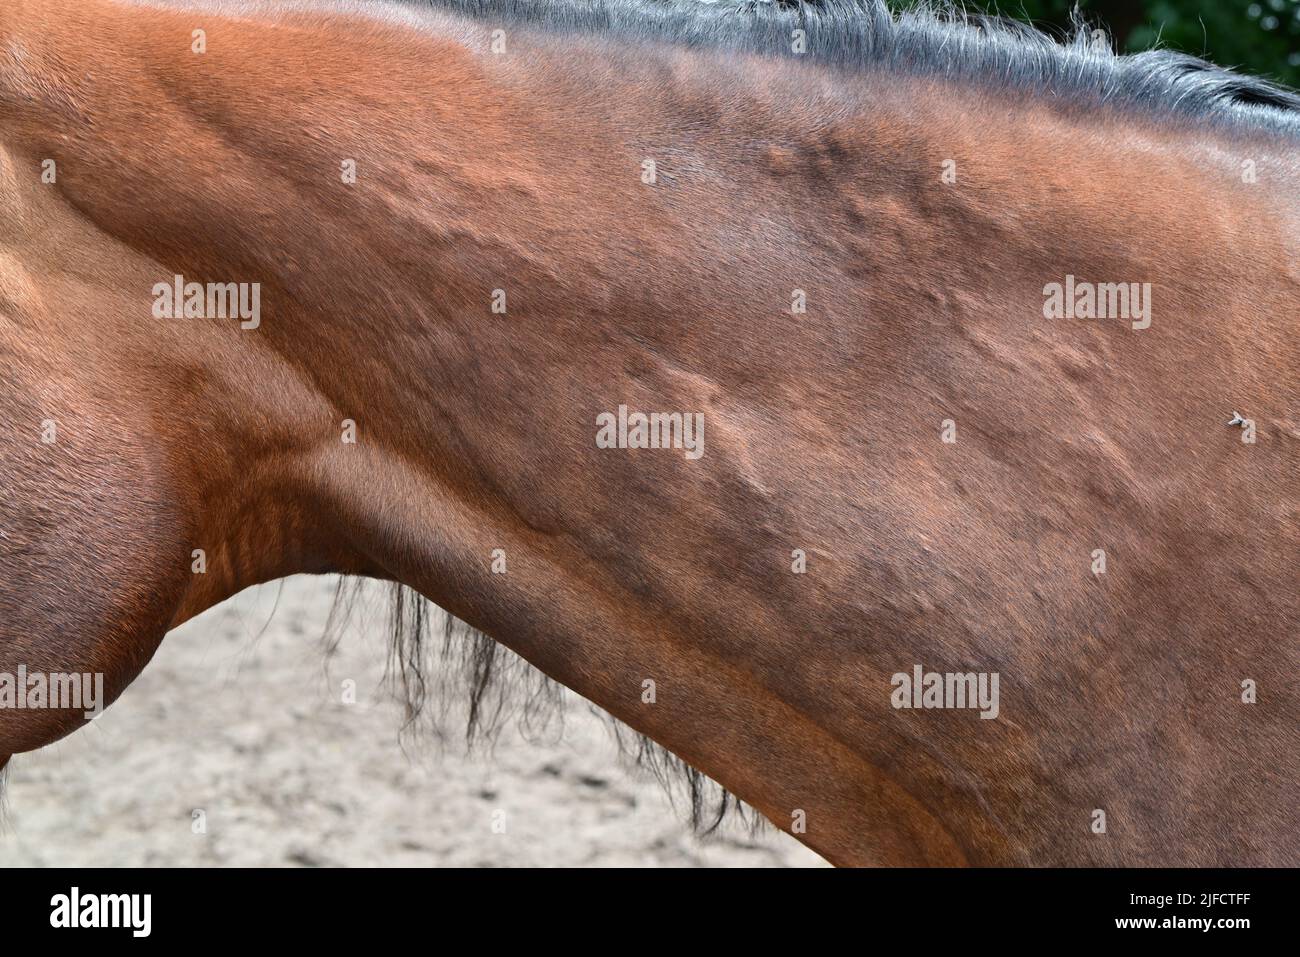 Hives or allergic wheels on a horses neck Stock Photo